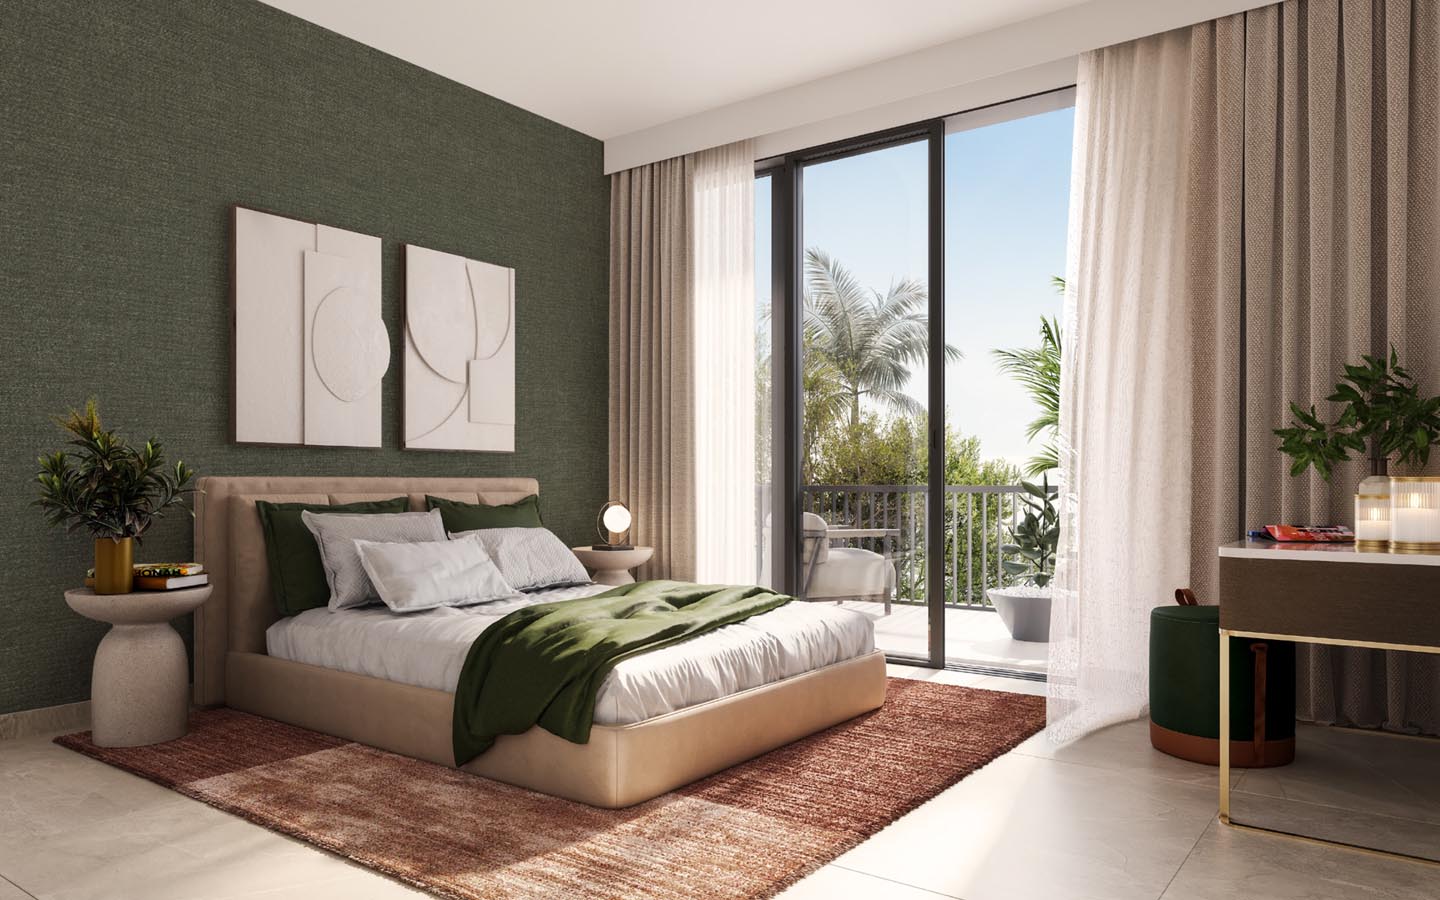 Elora at The Valley by Emaar Properties offers 3 and 4-bedroom townhouses